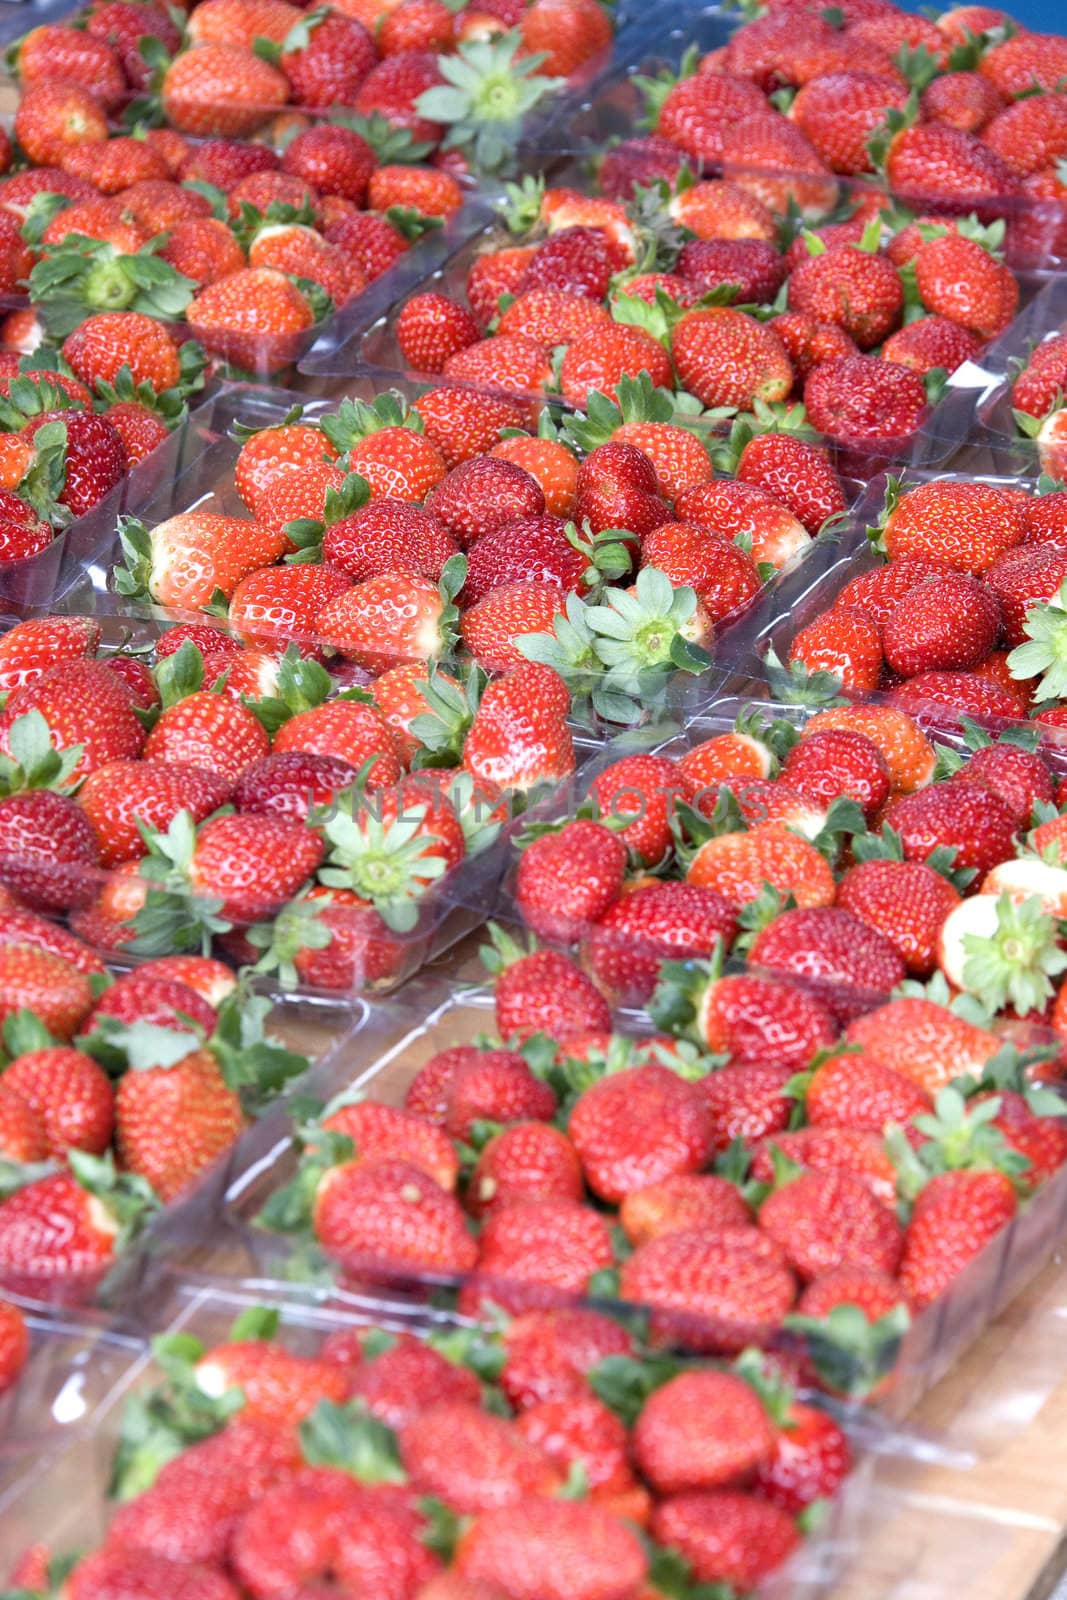 Image of freshly harvested strawberries for sale at a farmers' market.